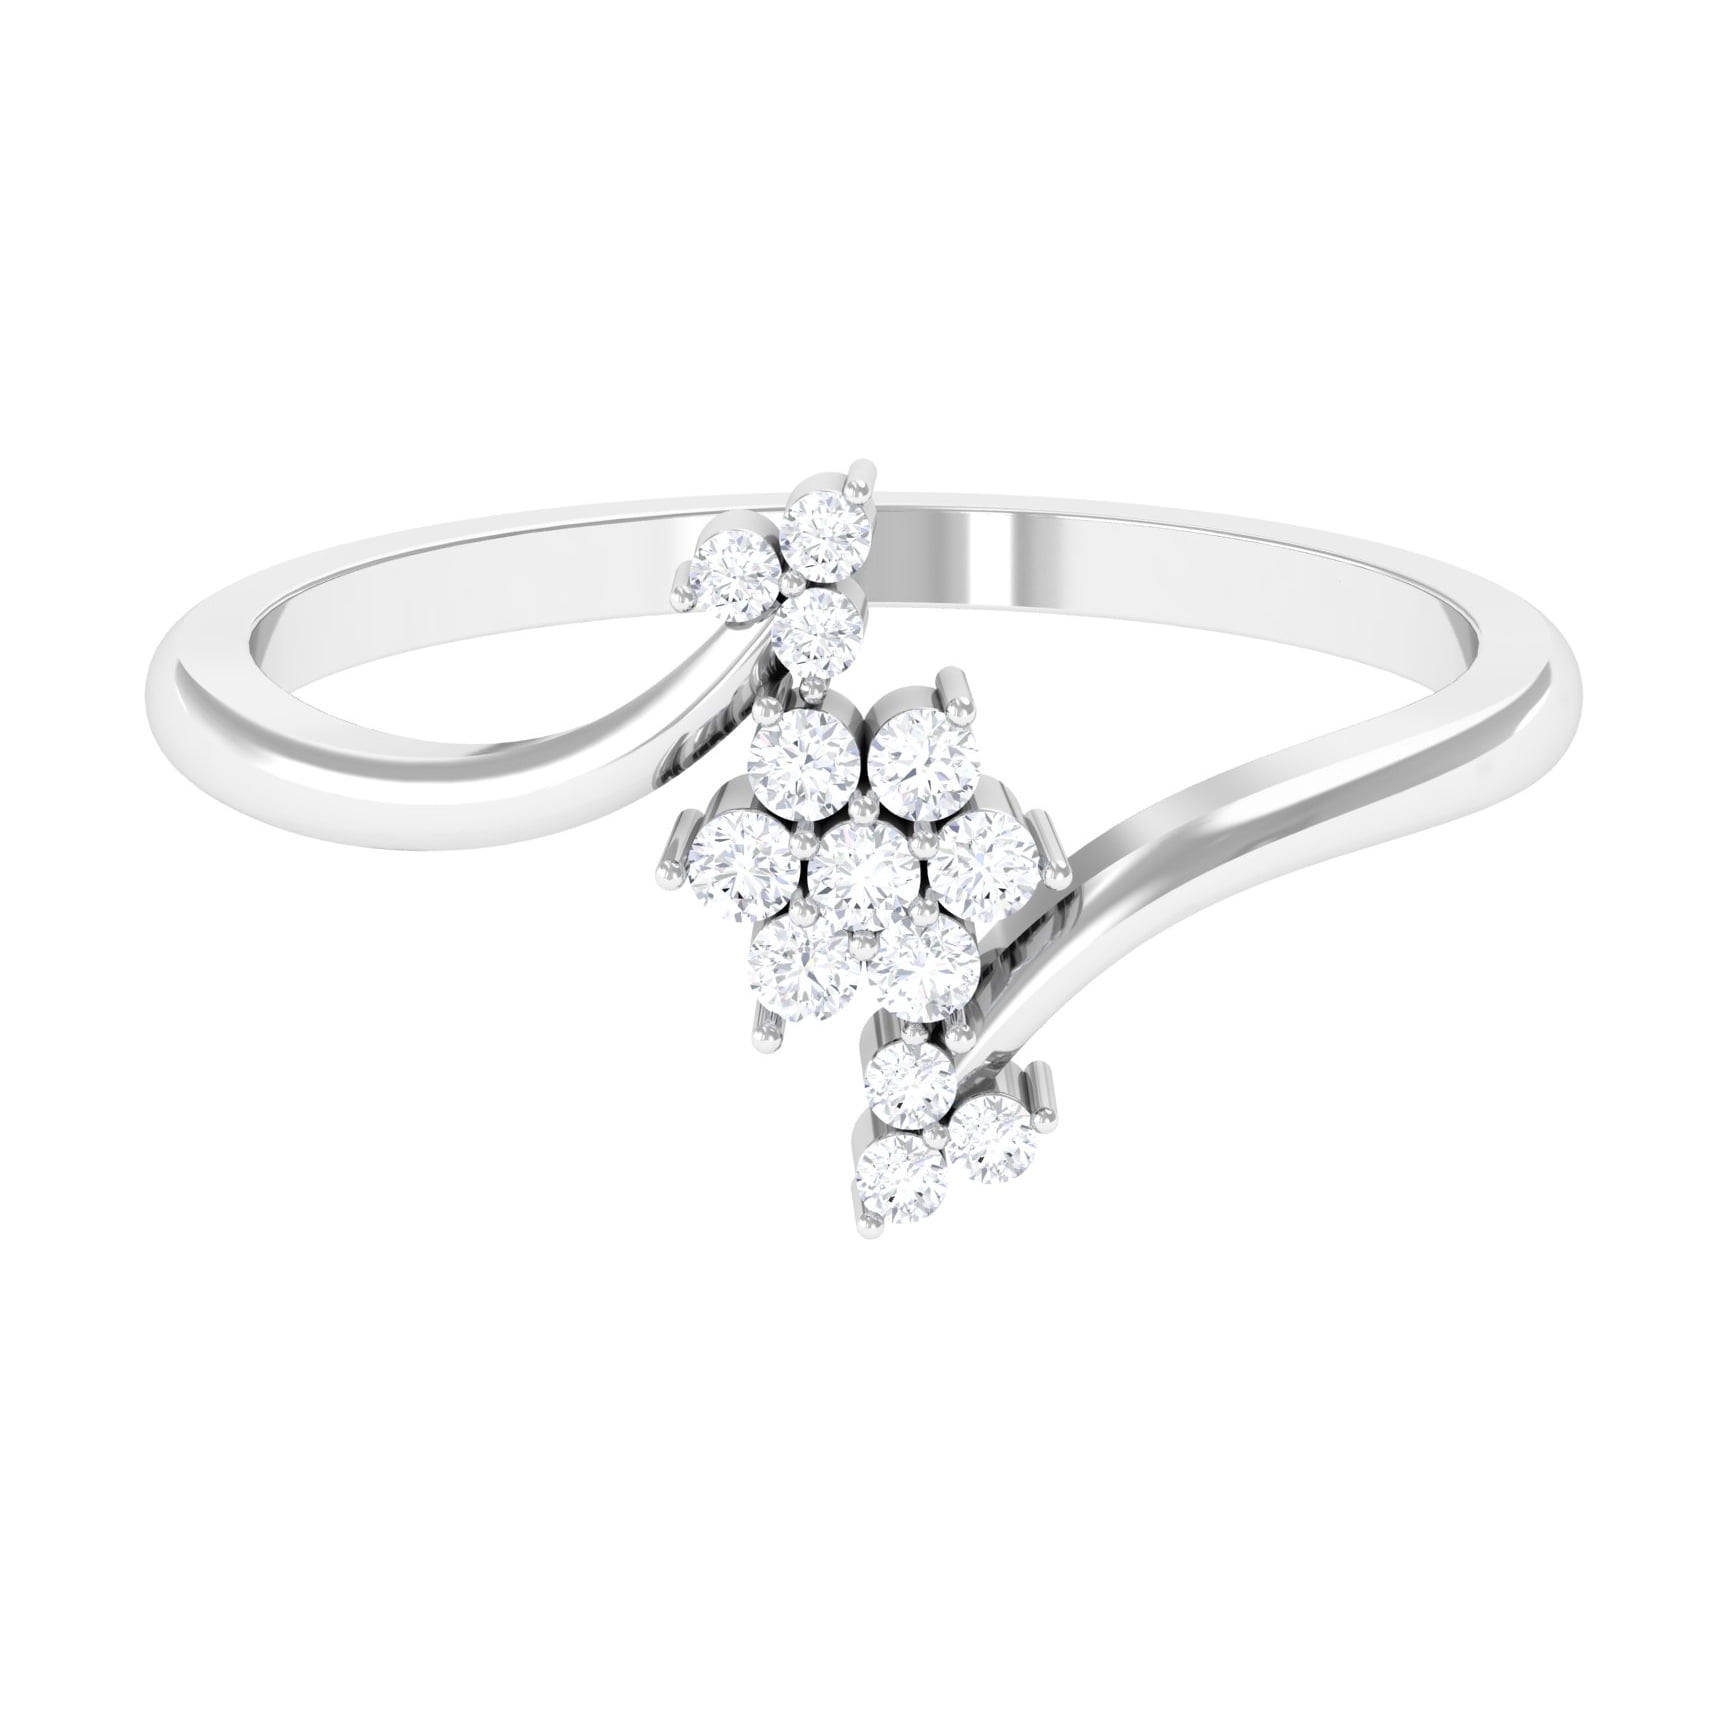 TANISHQ Pear Diamond Ring, Weight: 10gm, Size: 15 at Rs 45000 in Saharanpur